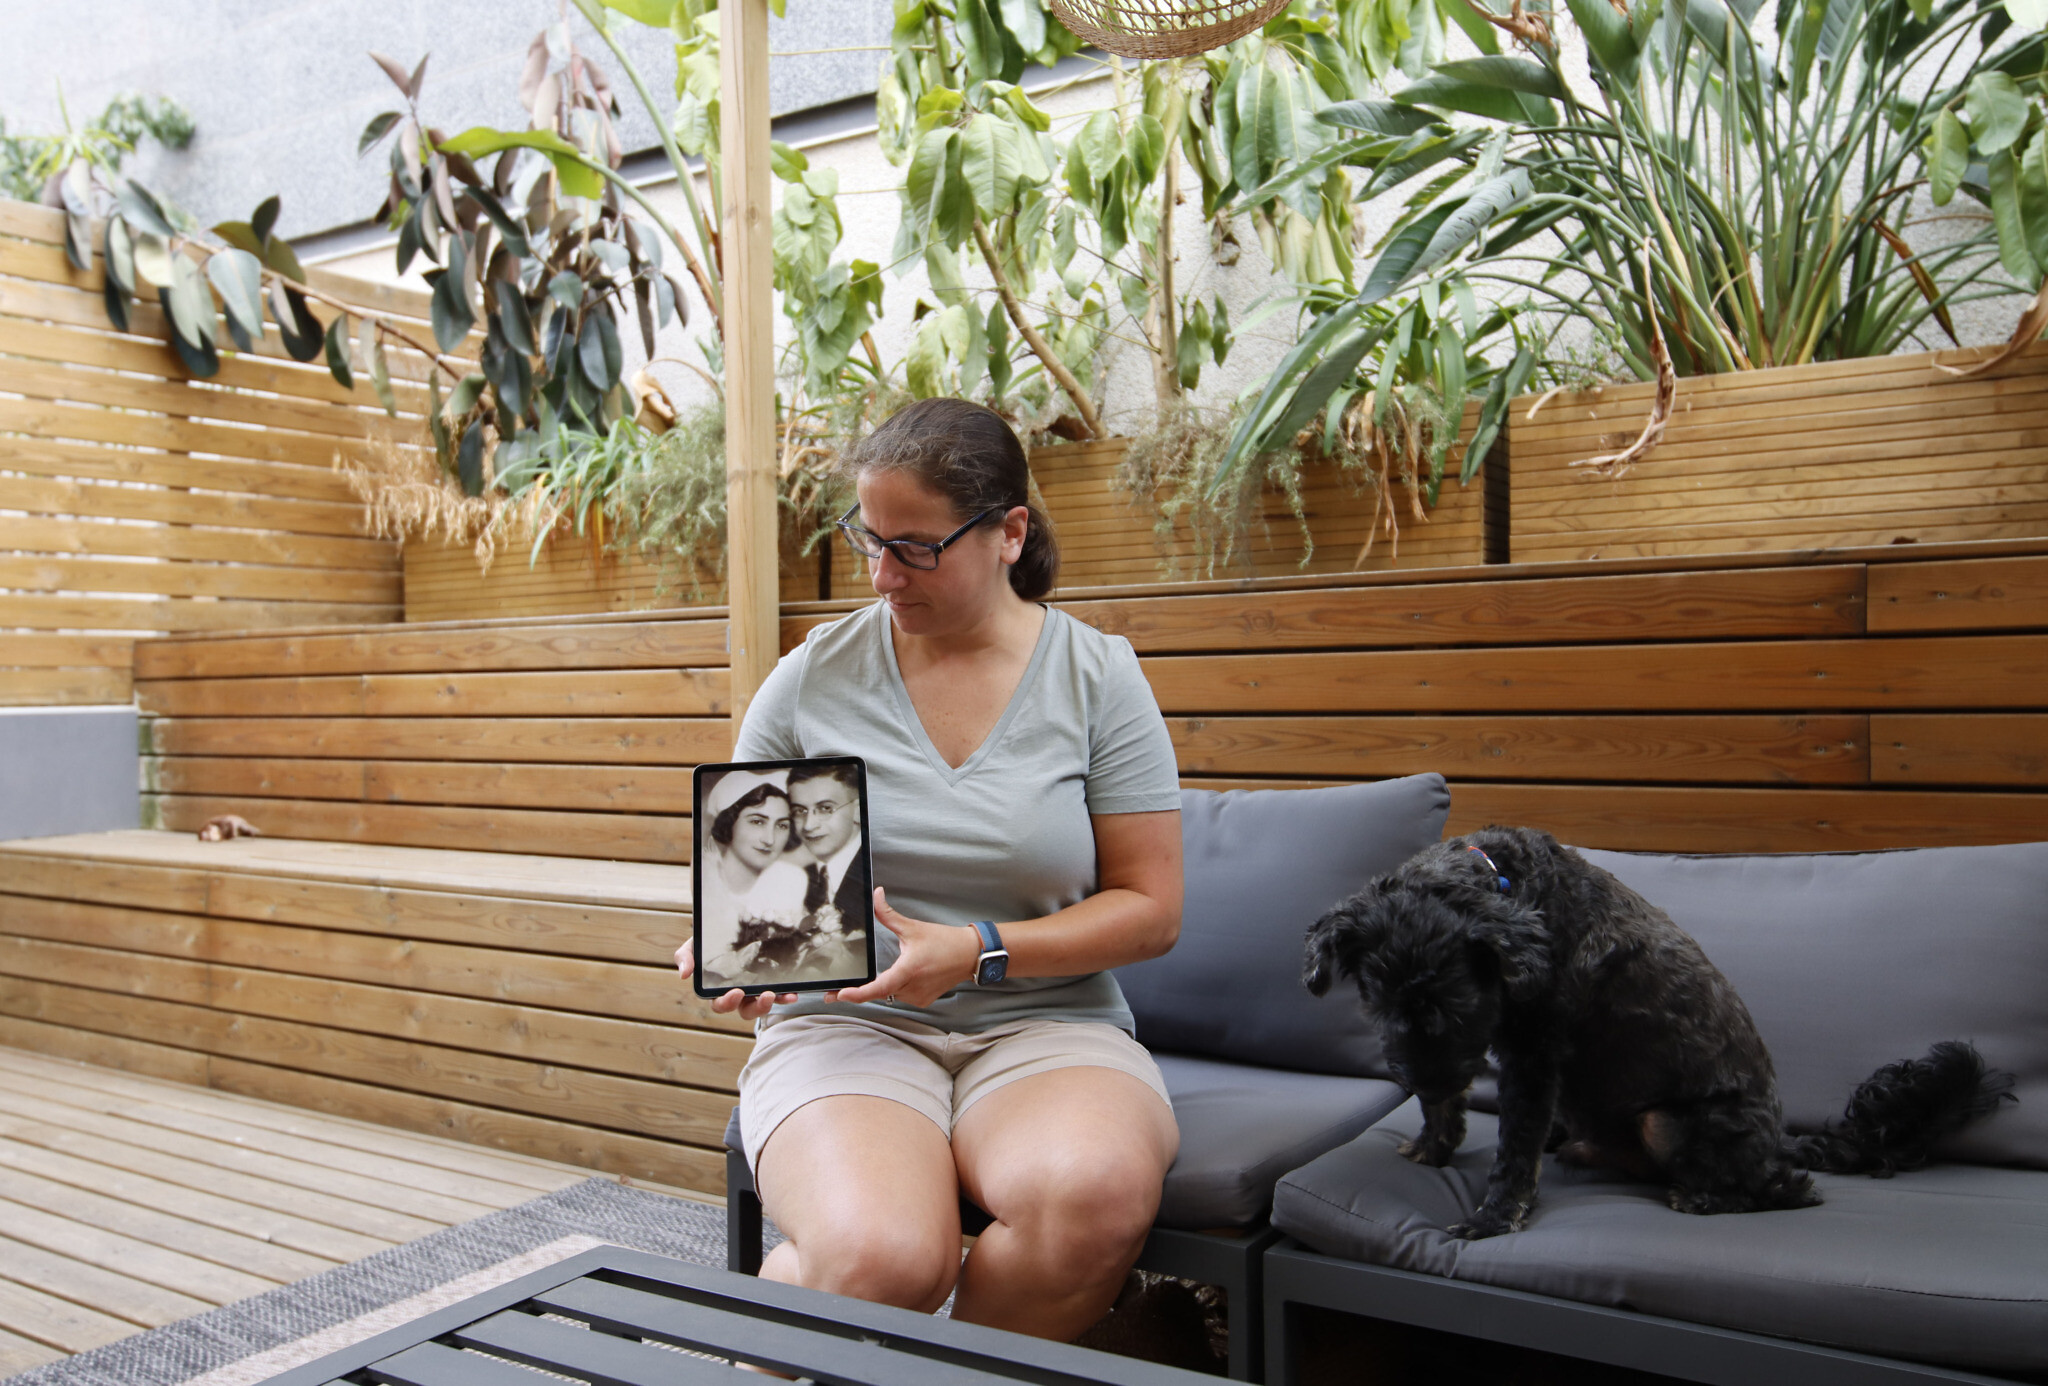 Julie Bronder displays an image of her maternal grandparents, Gertrude Klarman Kornblau and Aaron Kornblau, at her apartment in Barcelona, Spain, on June 20, 2022. They left Austria and arrived in the United States in July 1938. (Raquel G. Frohlich)